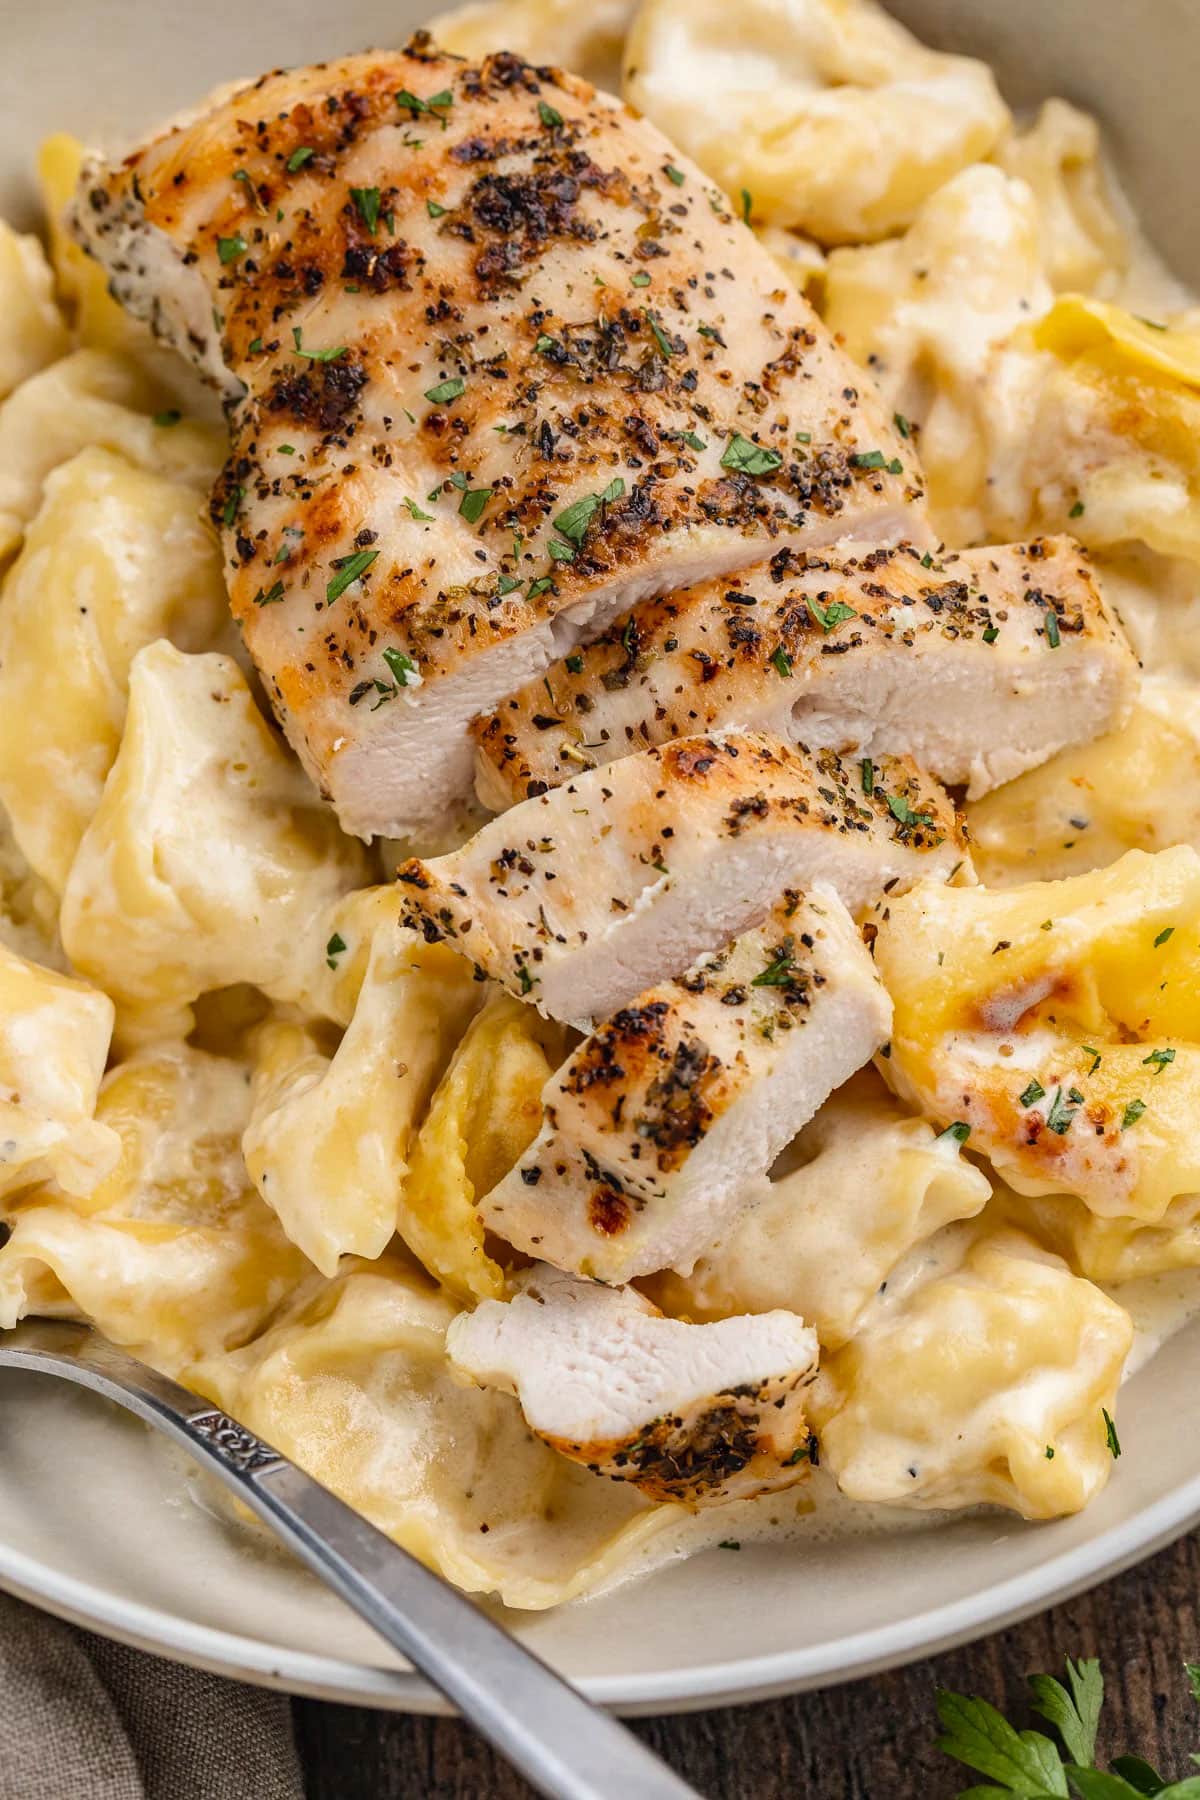 Creamy asiago tortelloni topped with slices of grilled chicken.